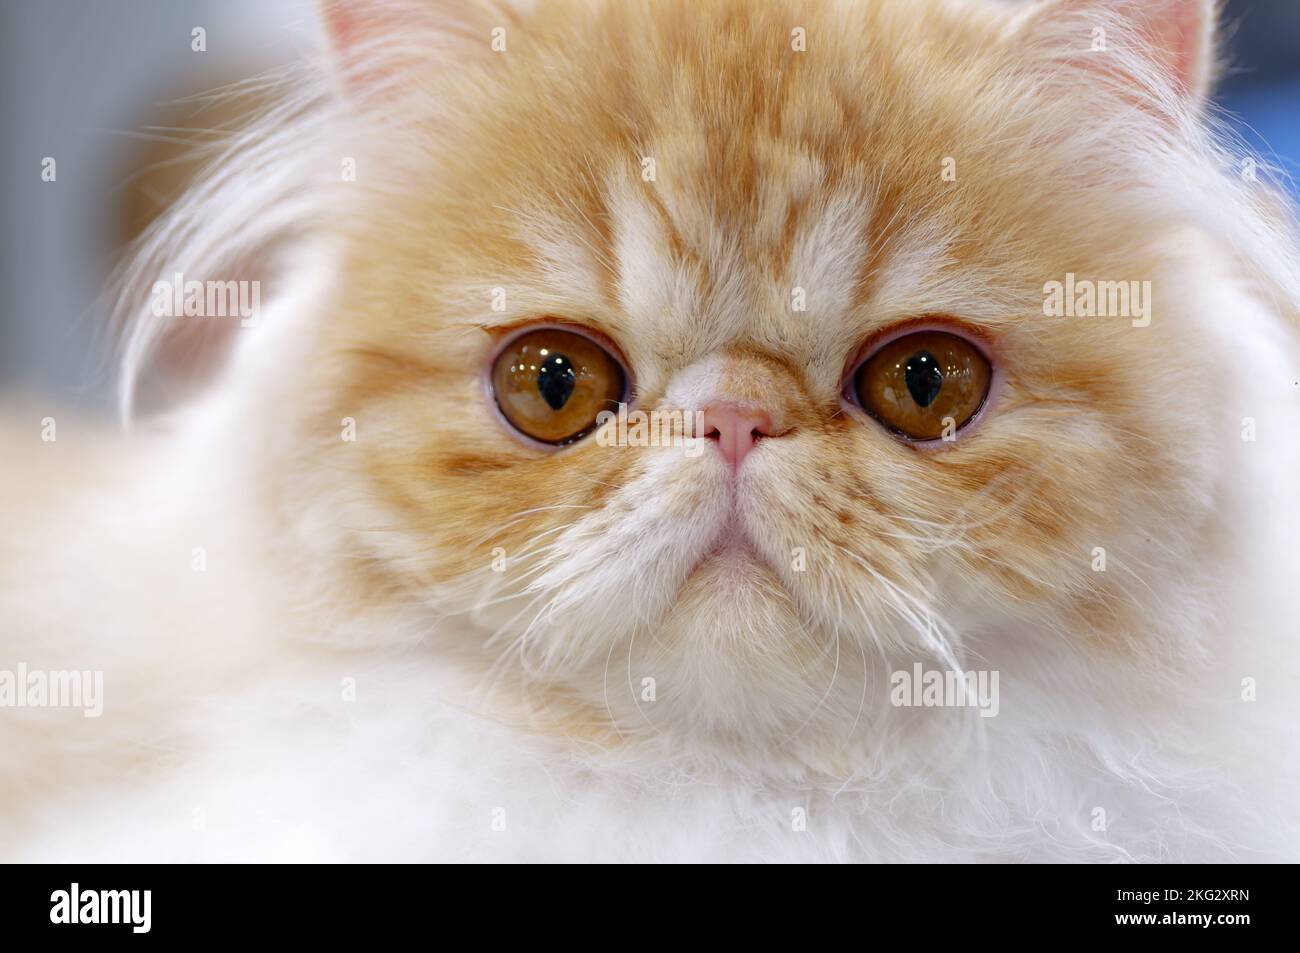 Young exotic persian cat, white and light brown fur, close-up portrait Stock Photo